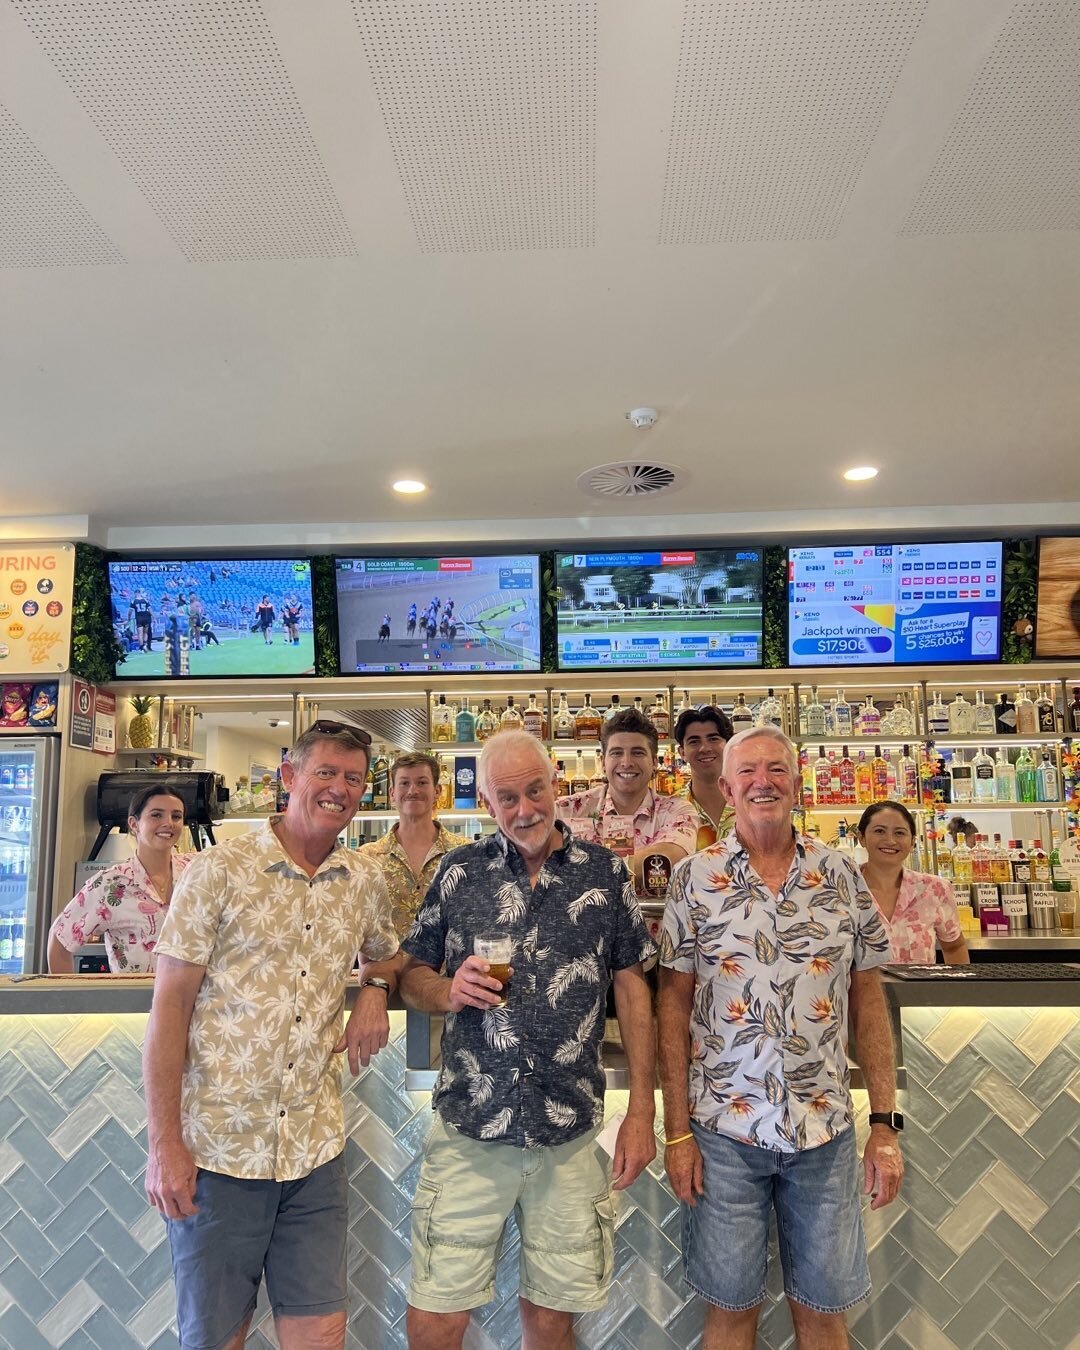 WELCOME TO SATURDAY&rsquo;S PUNTERS PARADISE

Hawaiian shirts encouraged, smiles are compulsory 🌺🍻